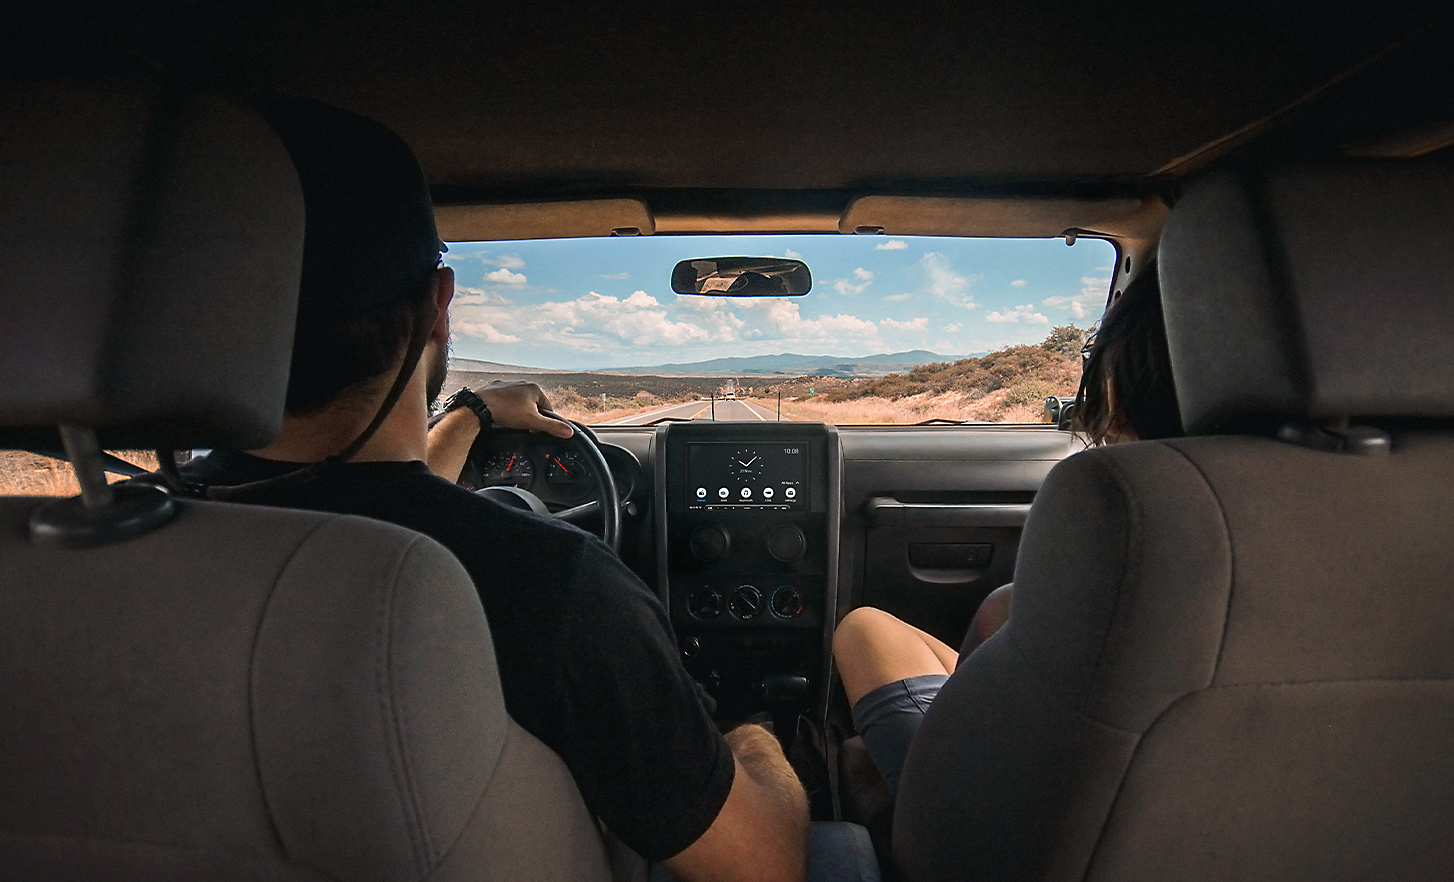 Image of two people driving through a desert-like environment with the XAV-AX6050 in the dashboard